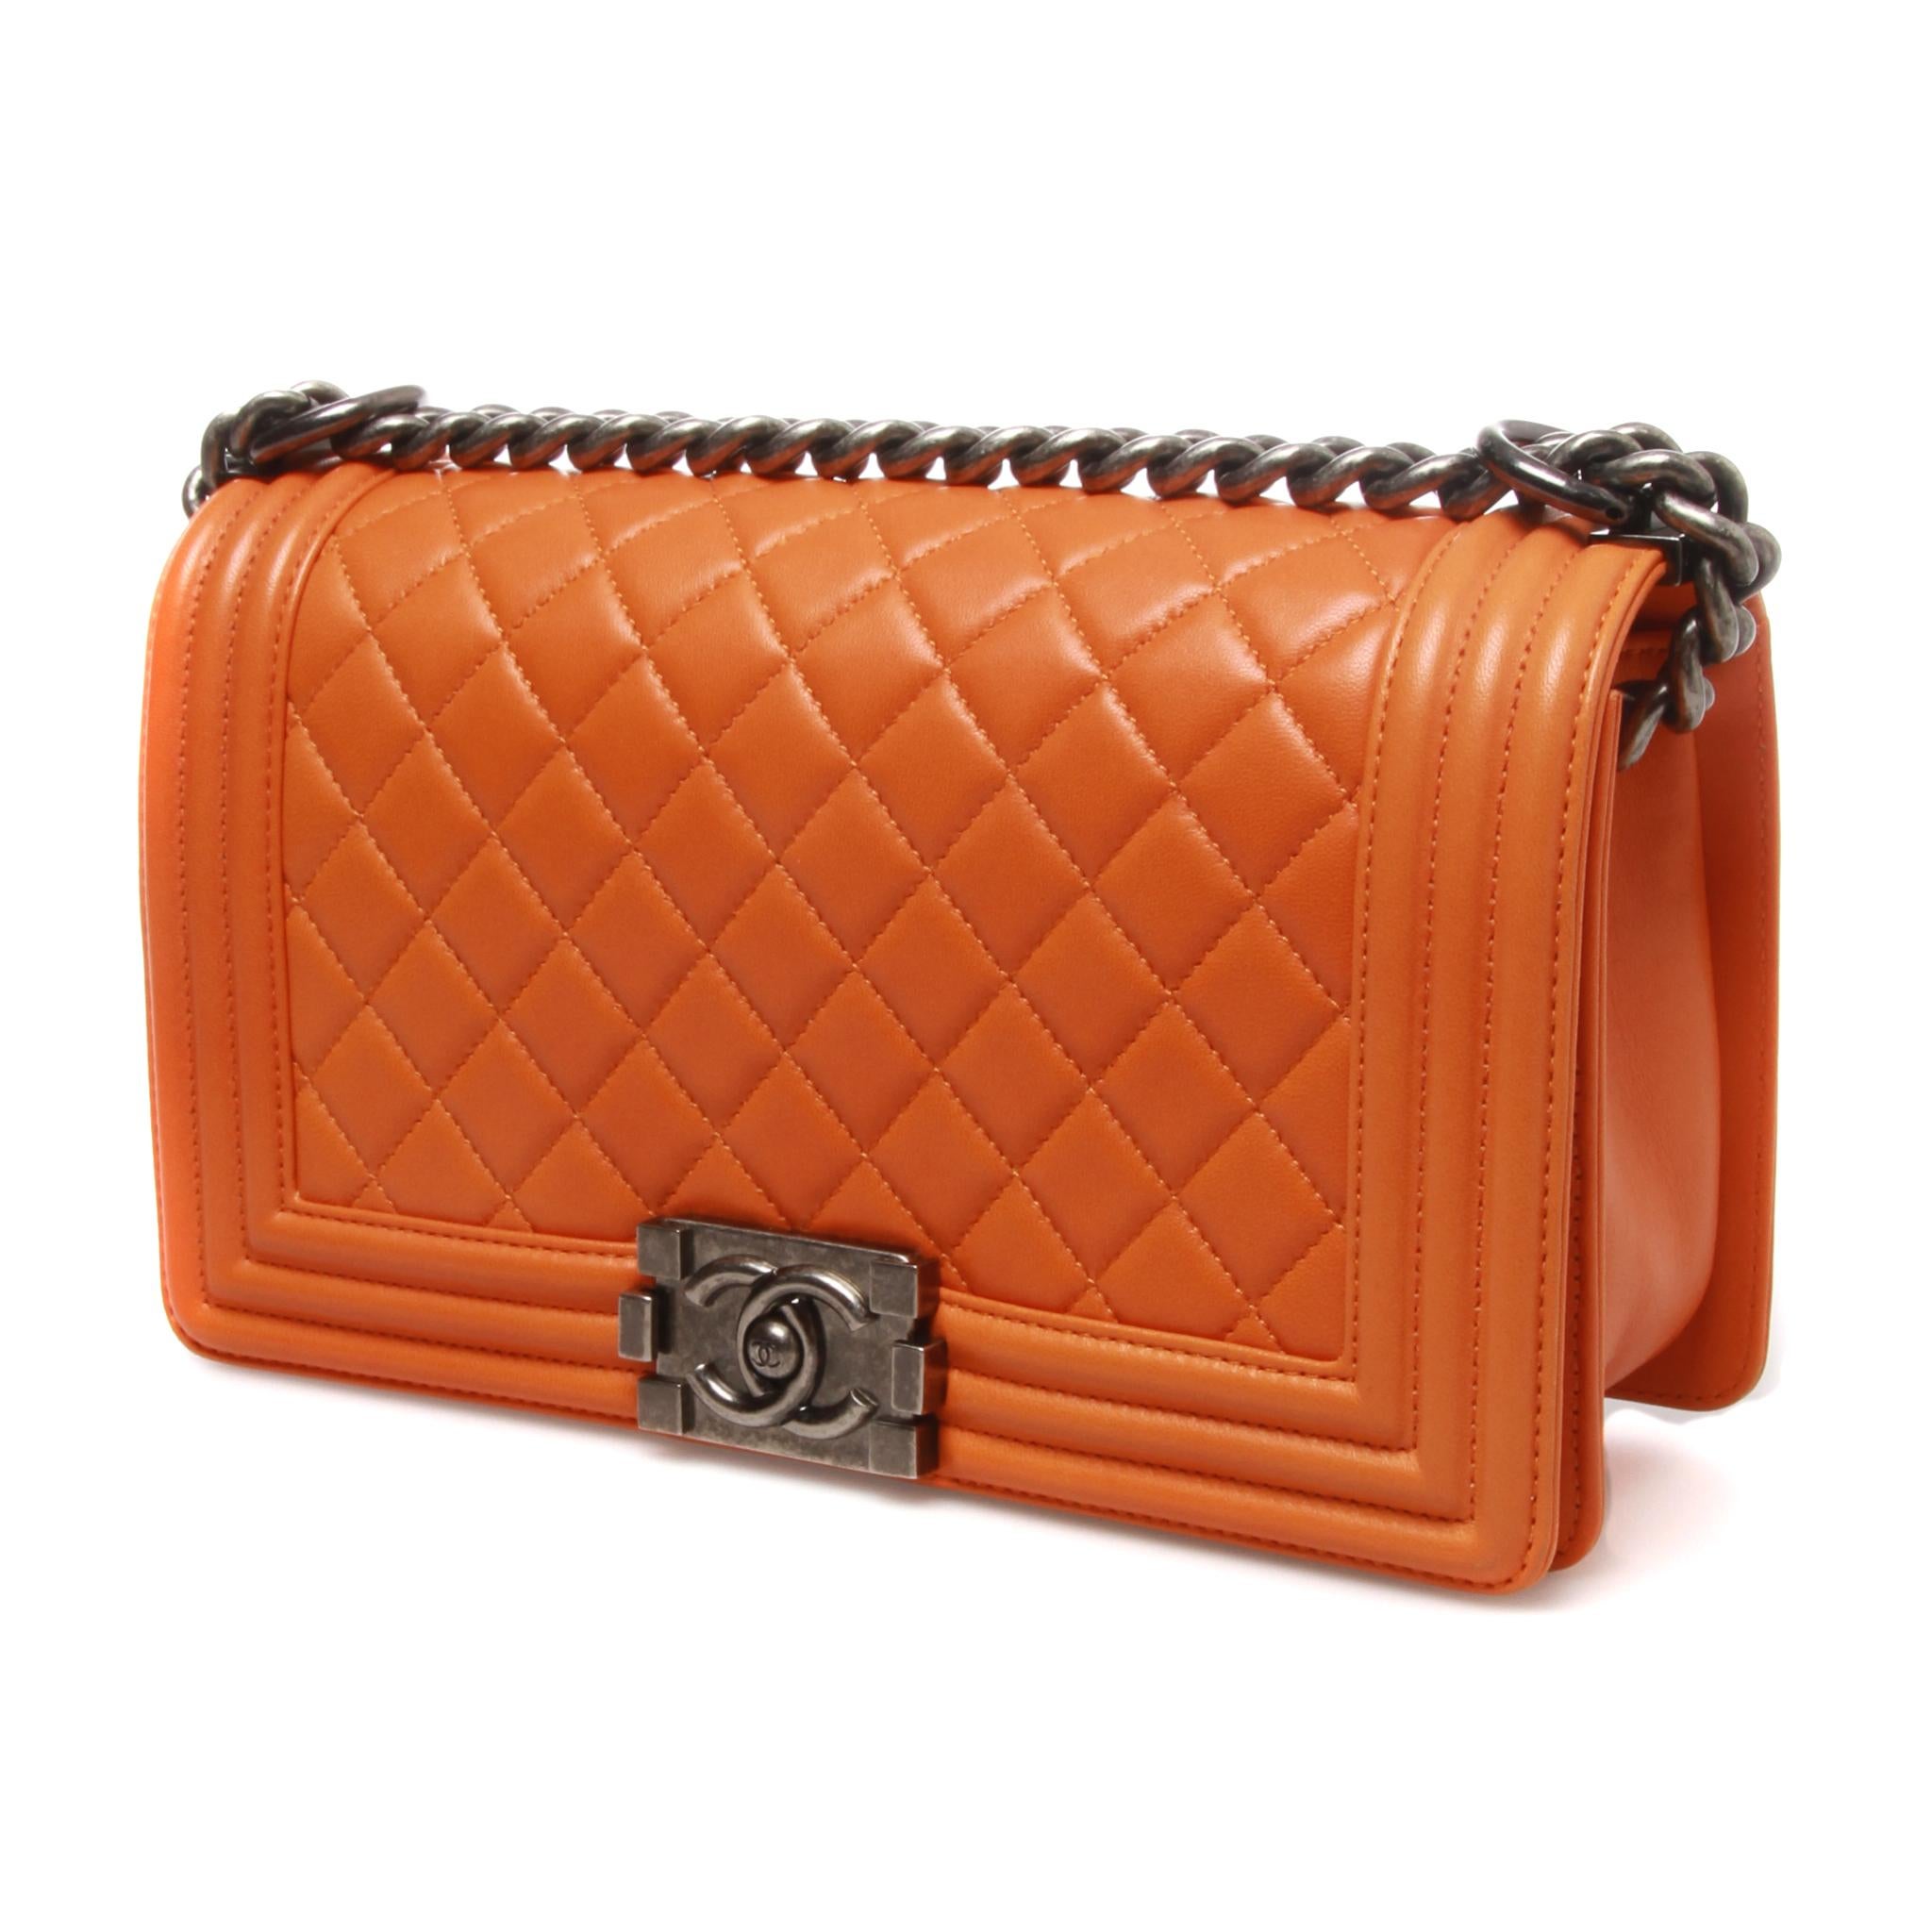 This collectable Chanel  Lambskin Quilted Medium Boy Flap Orange. 
This chic shoulder bag is crafted of diamond quilted luxurious lambskin leather with a linear quilted border in orange.
The bag features a ruthenium chain link shoulder strap with a